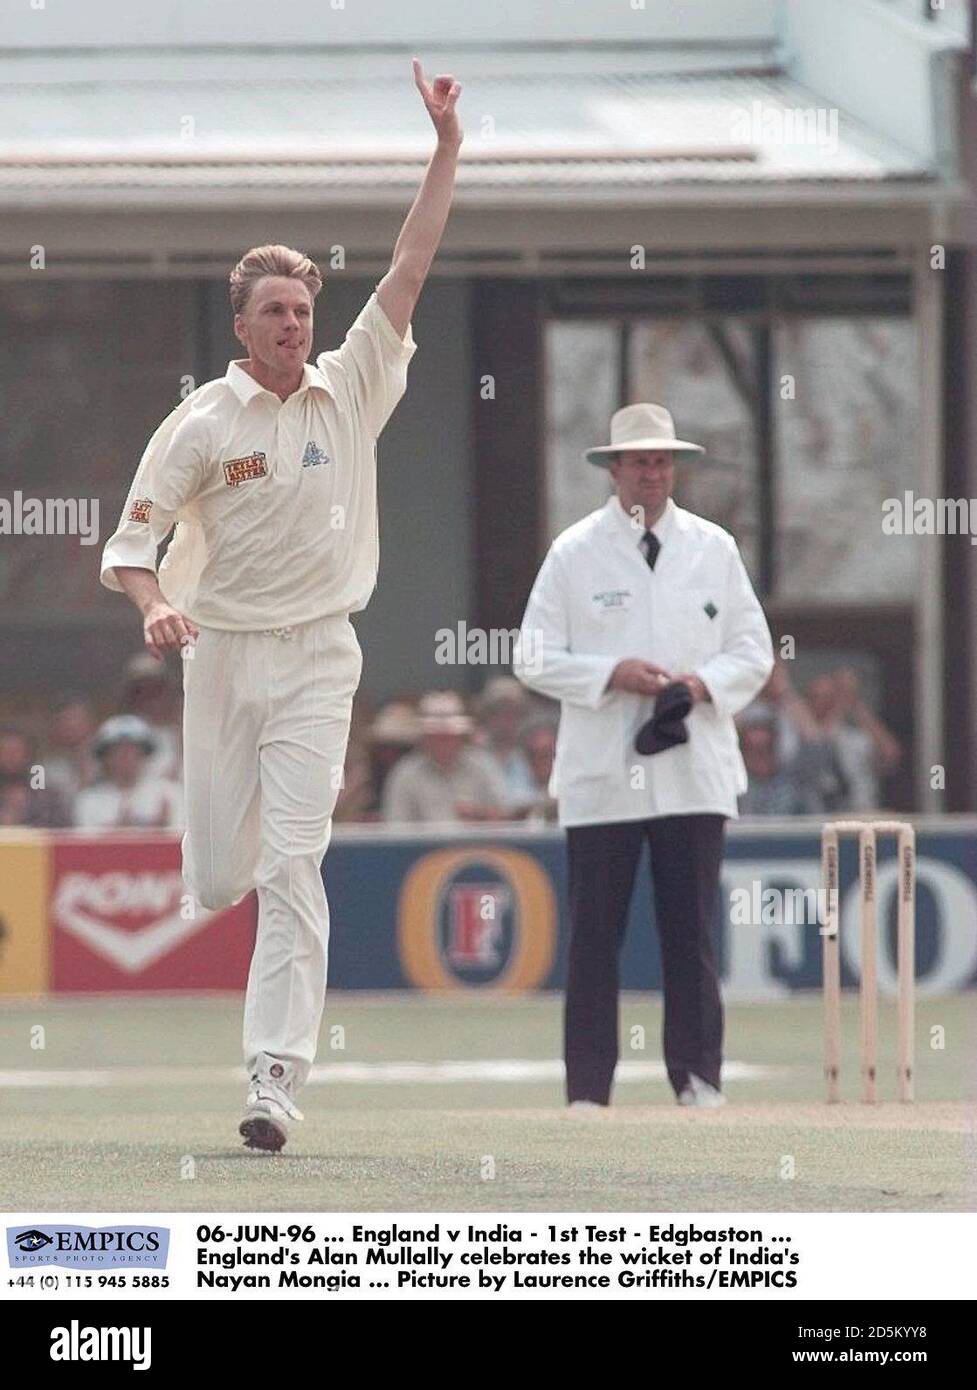 06-JUN-96 ... England v India - 1st Test - Edgbaston ... England's Alan Mullally celebrates the wicket of India's Nayan Mongia ... Picture by Laurence Griffiths/EMPICS Stock Photo